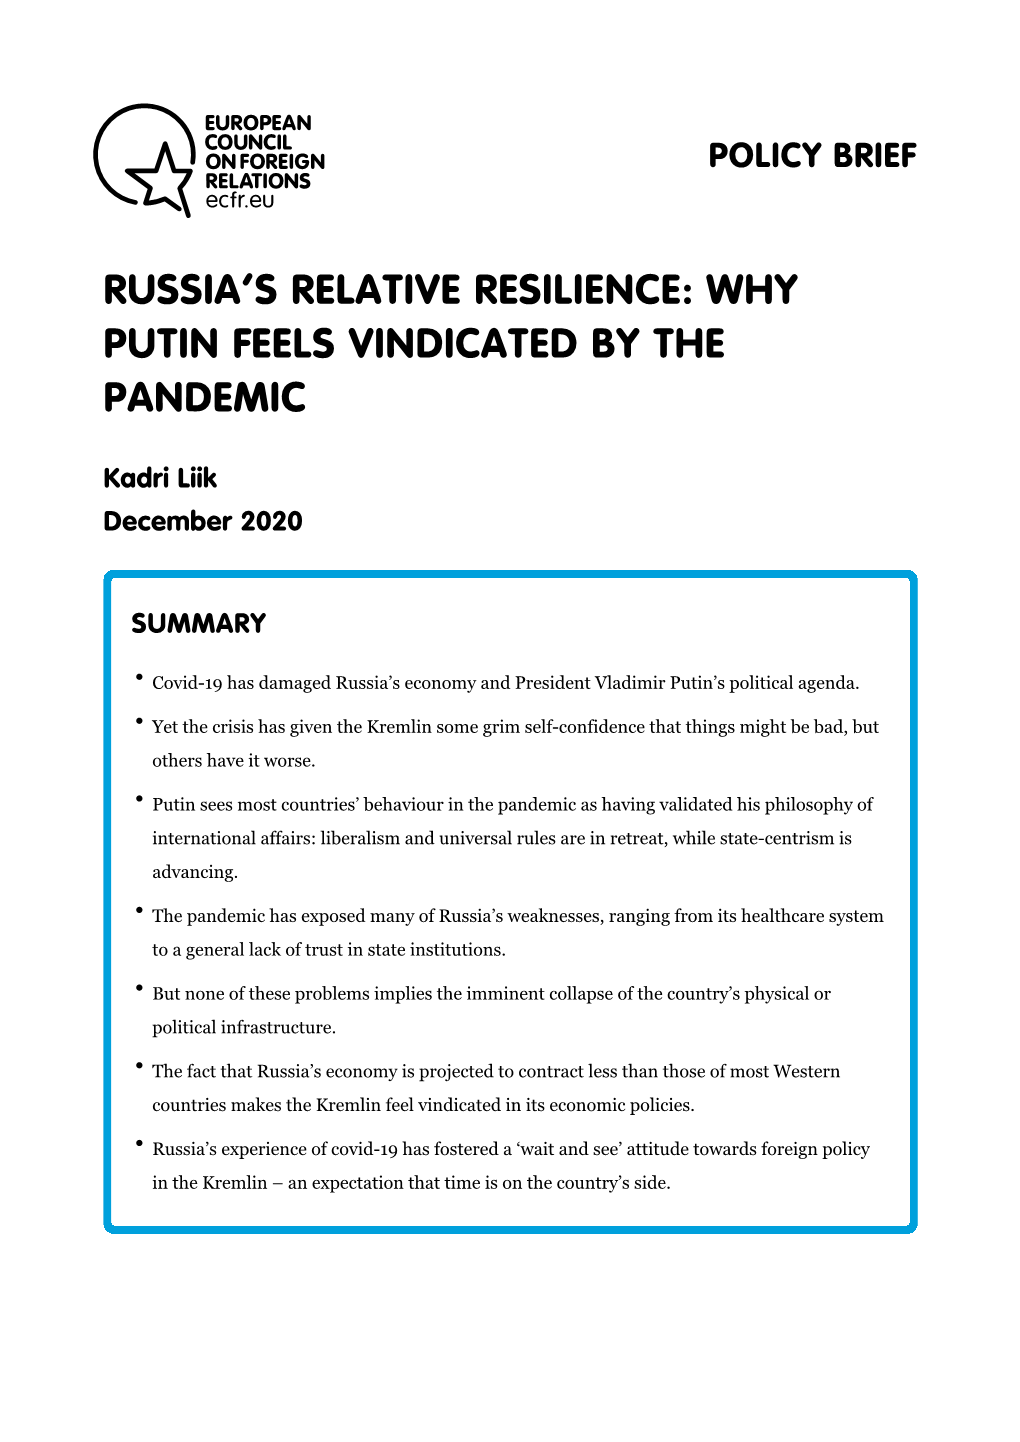 Russia's Relative Resilience: Why Putin Feels Vindicated by the Pandemic